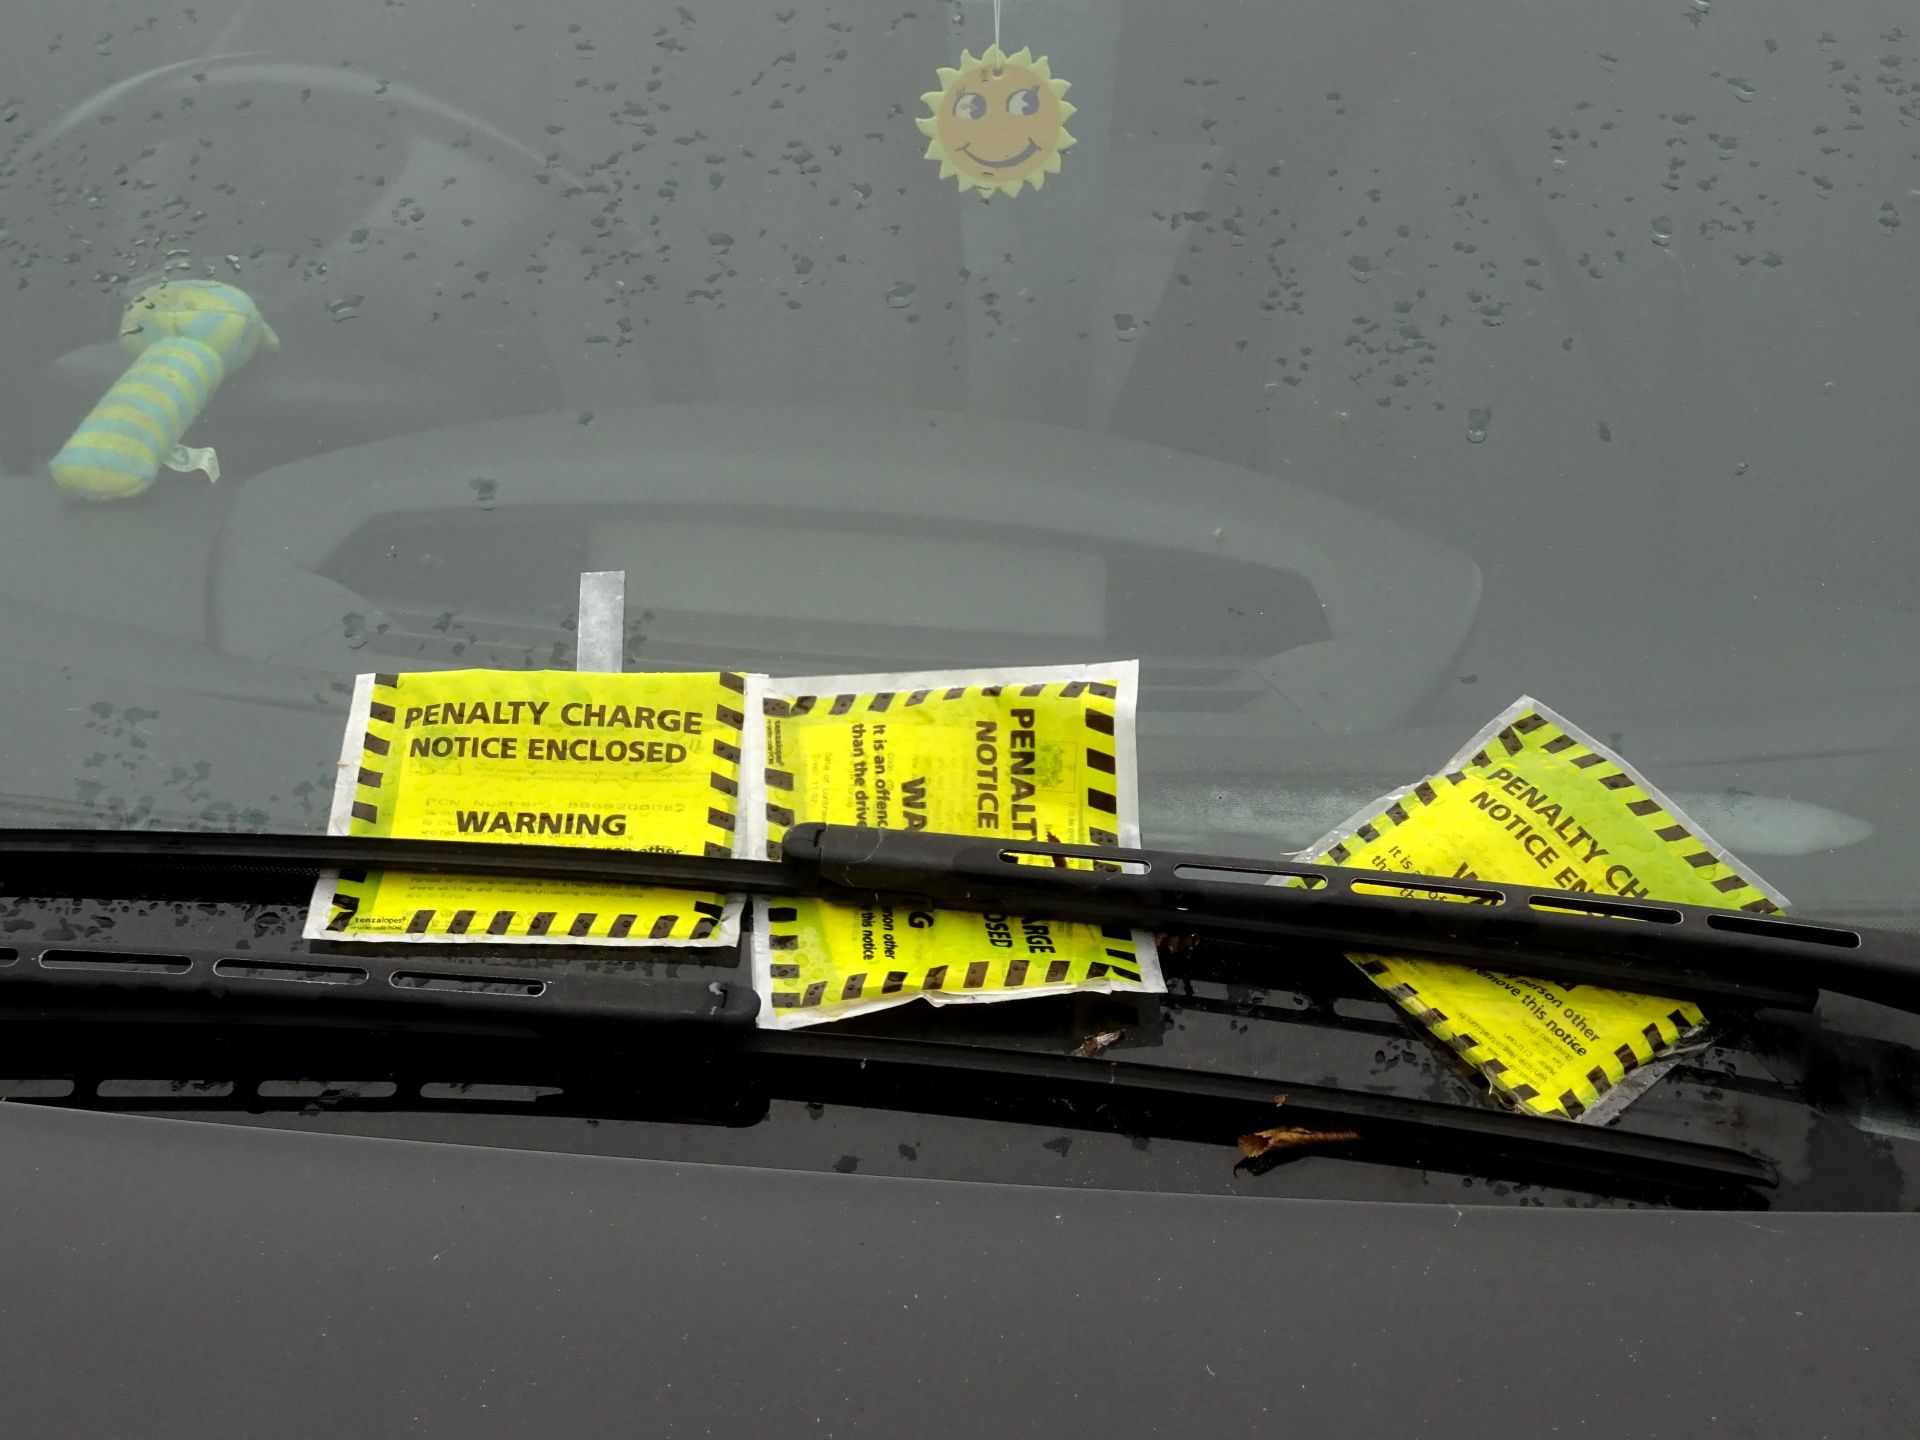 Russian Embassy racks up the most unpaid parking tickets